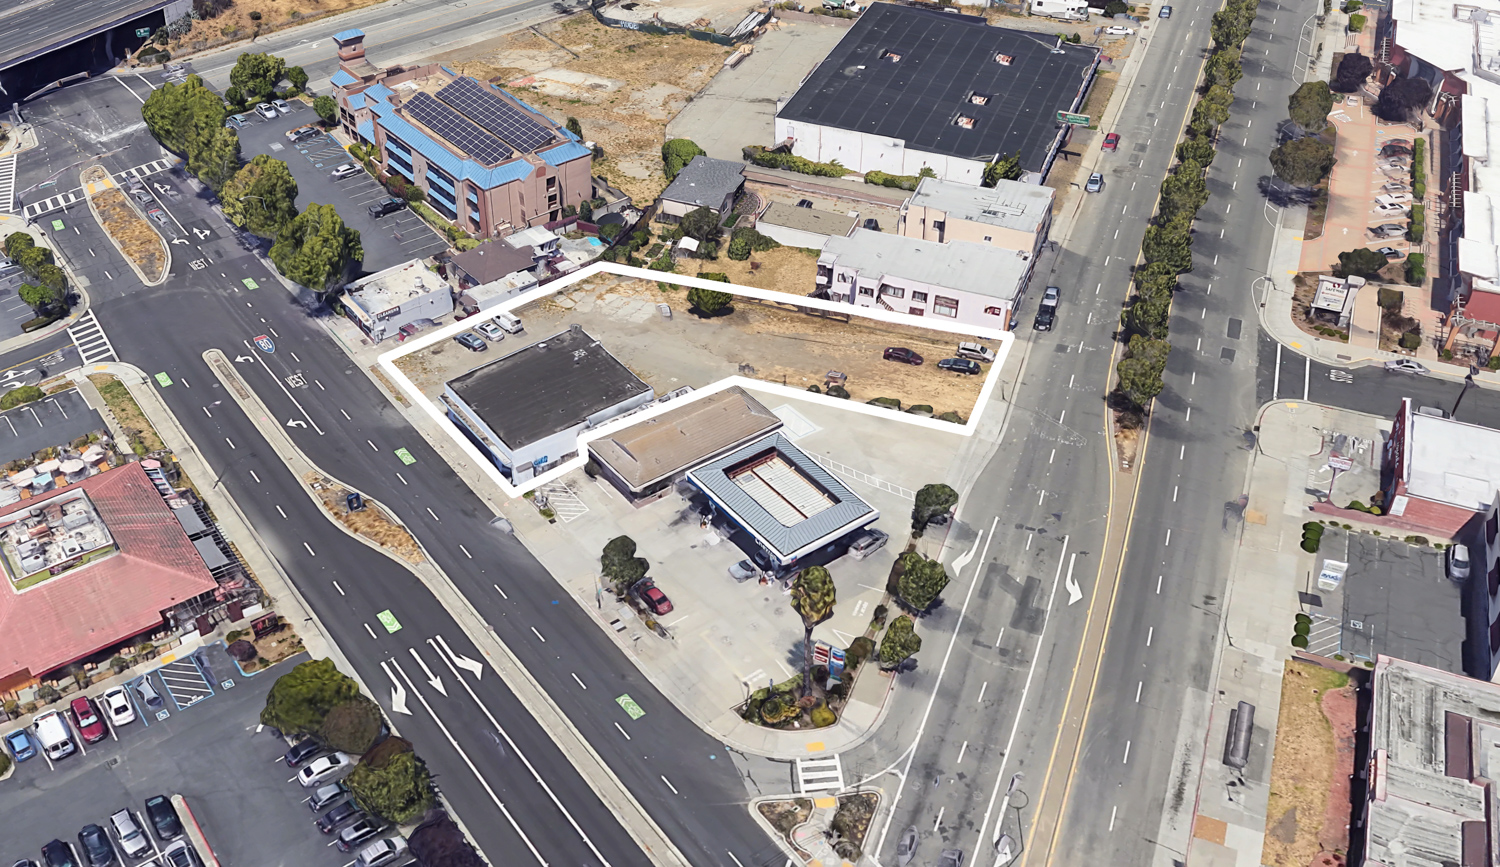 6115 Potrero Avenue, image via Google Satellite with property outlined by YIMBY